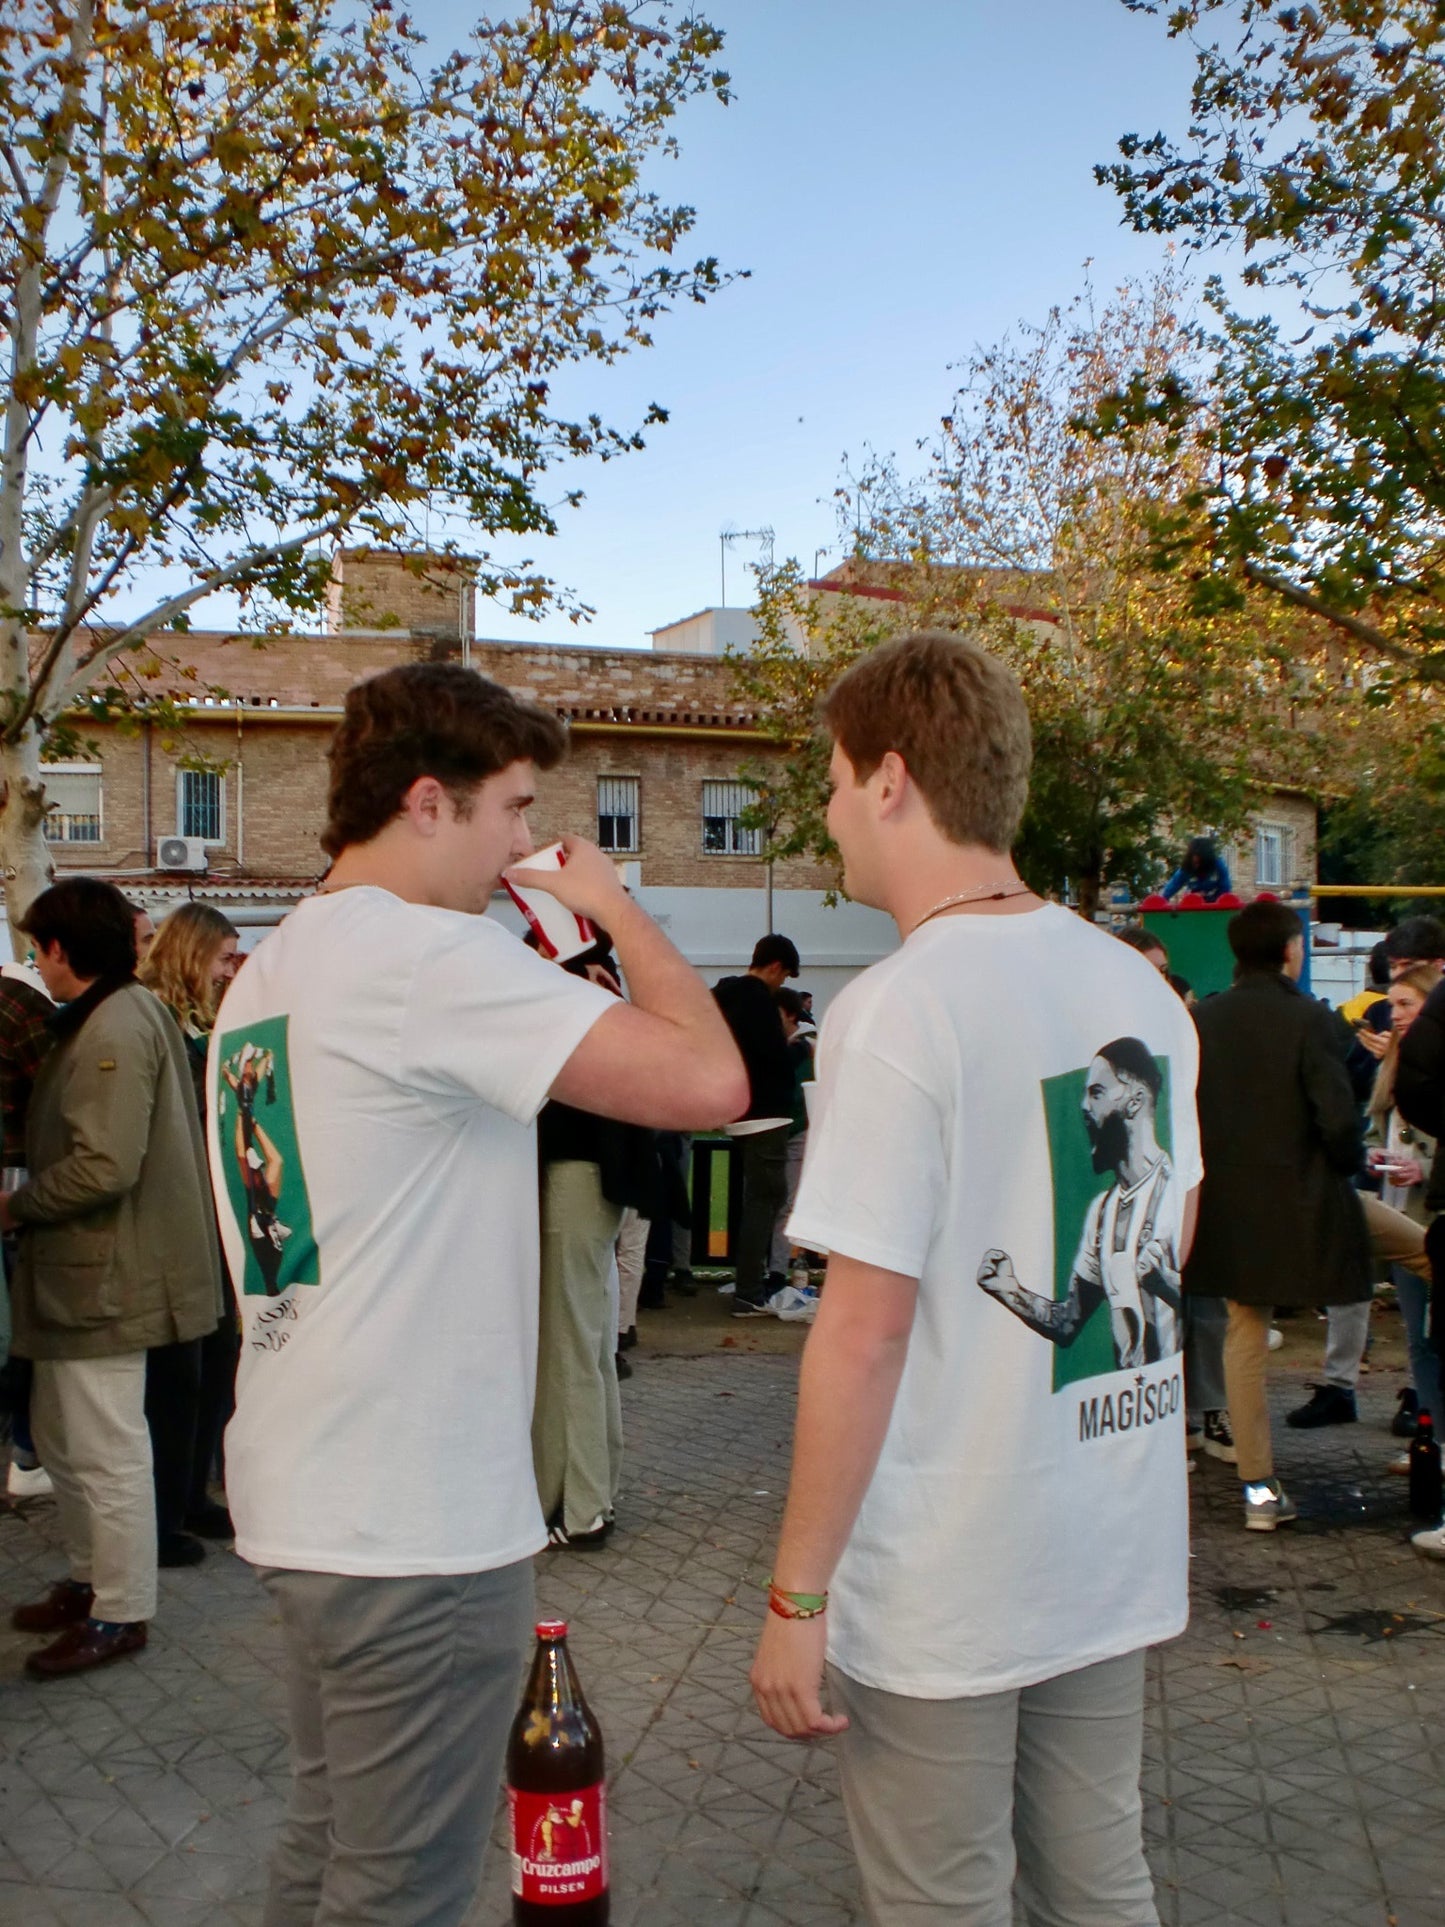 Real Betis "FROM PARENTS TO CHILDREN" T-shirt